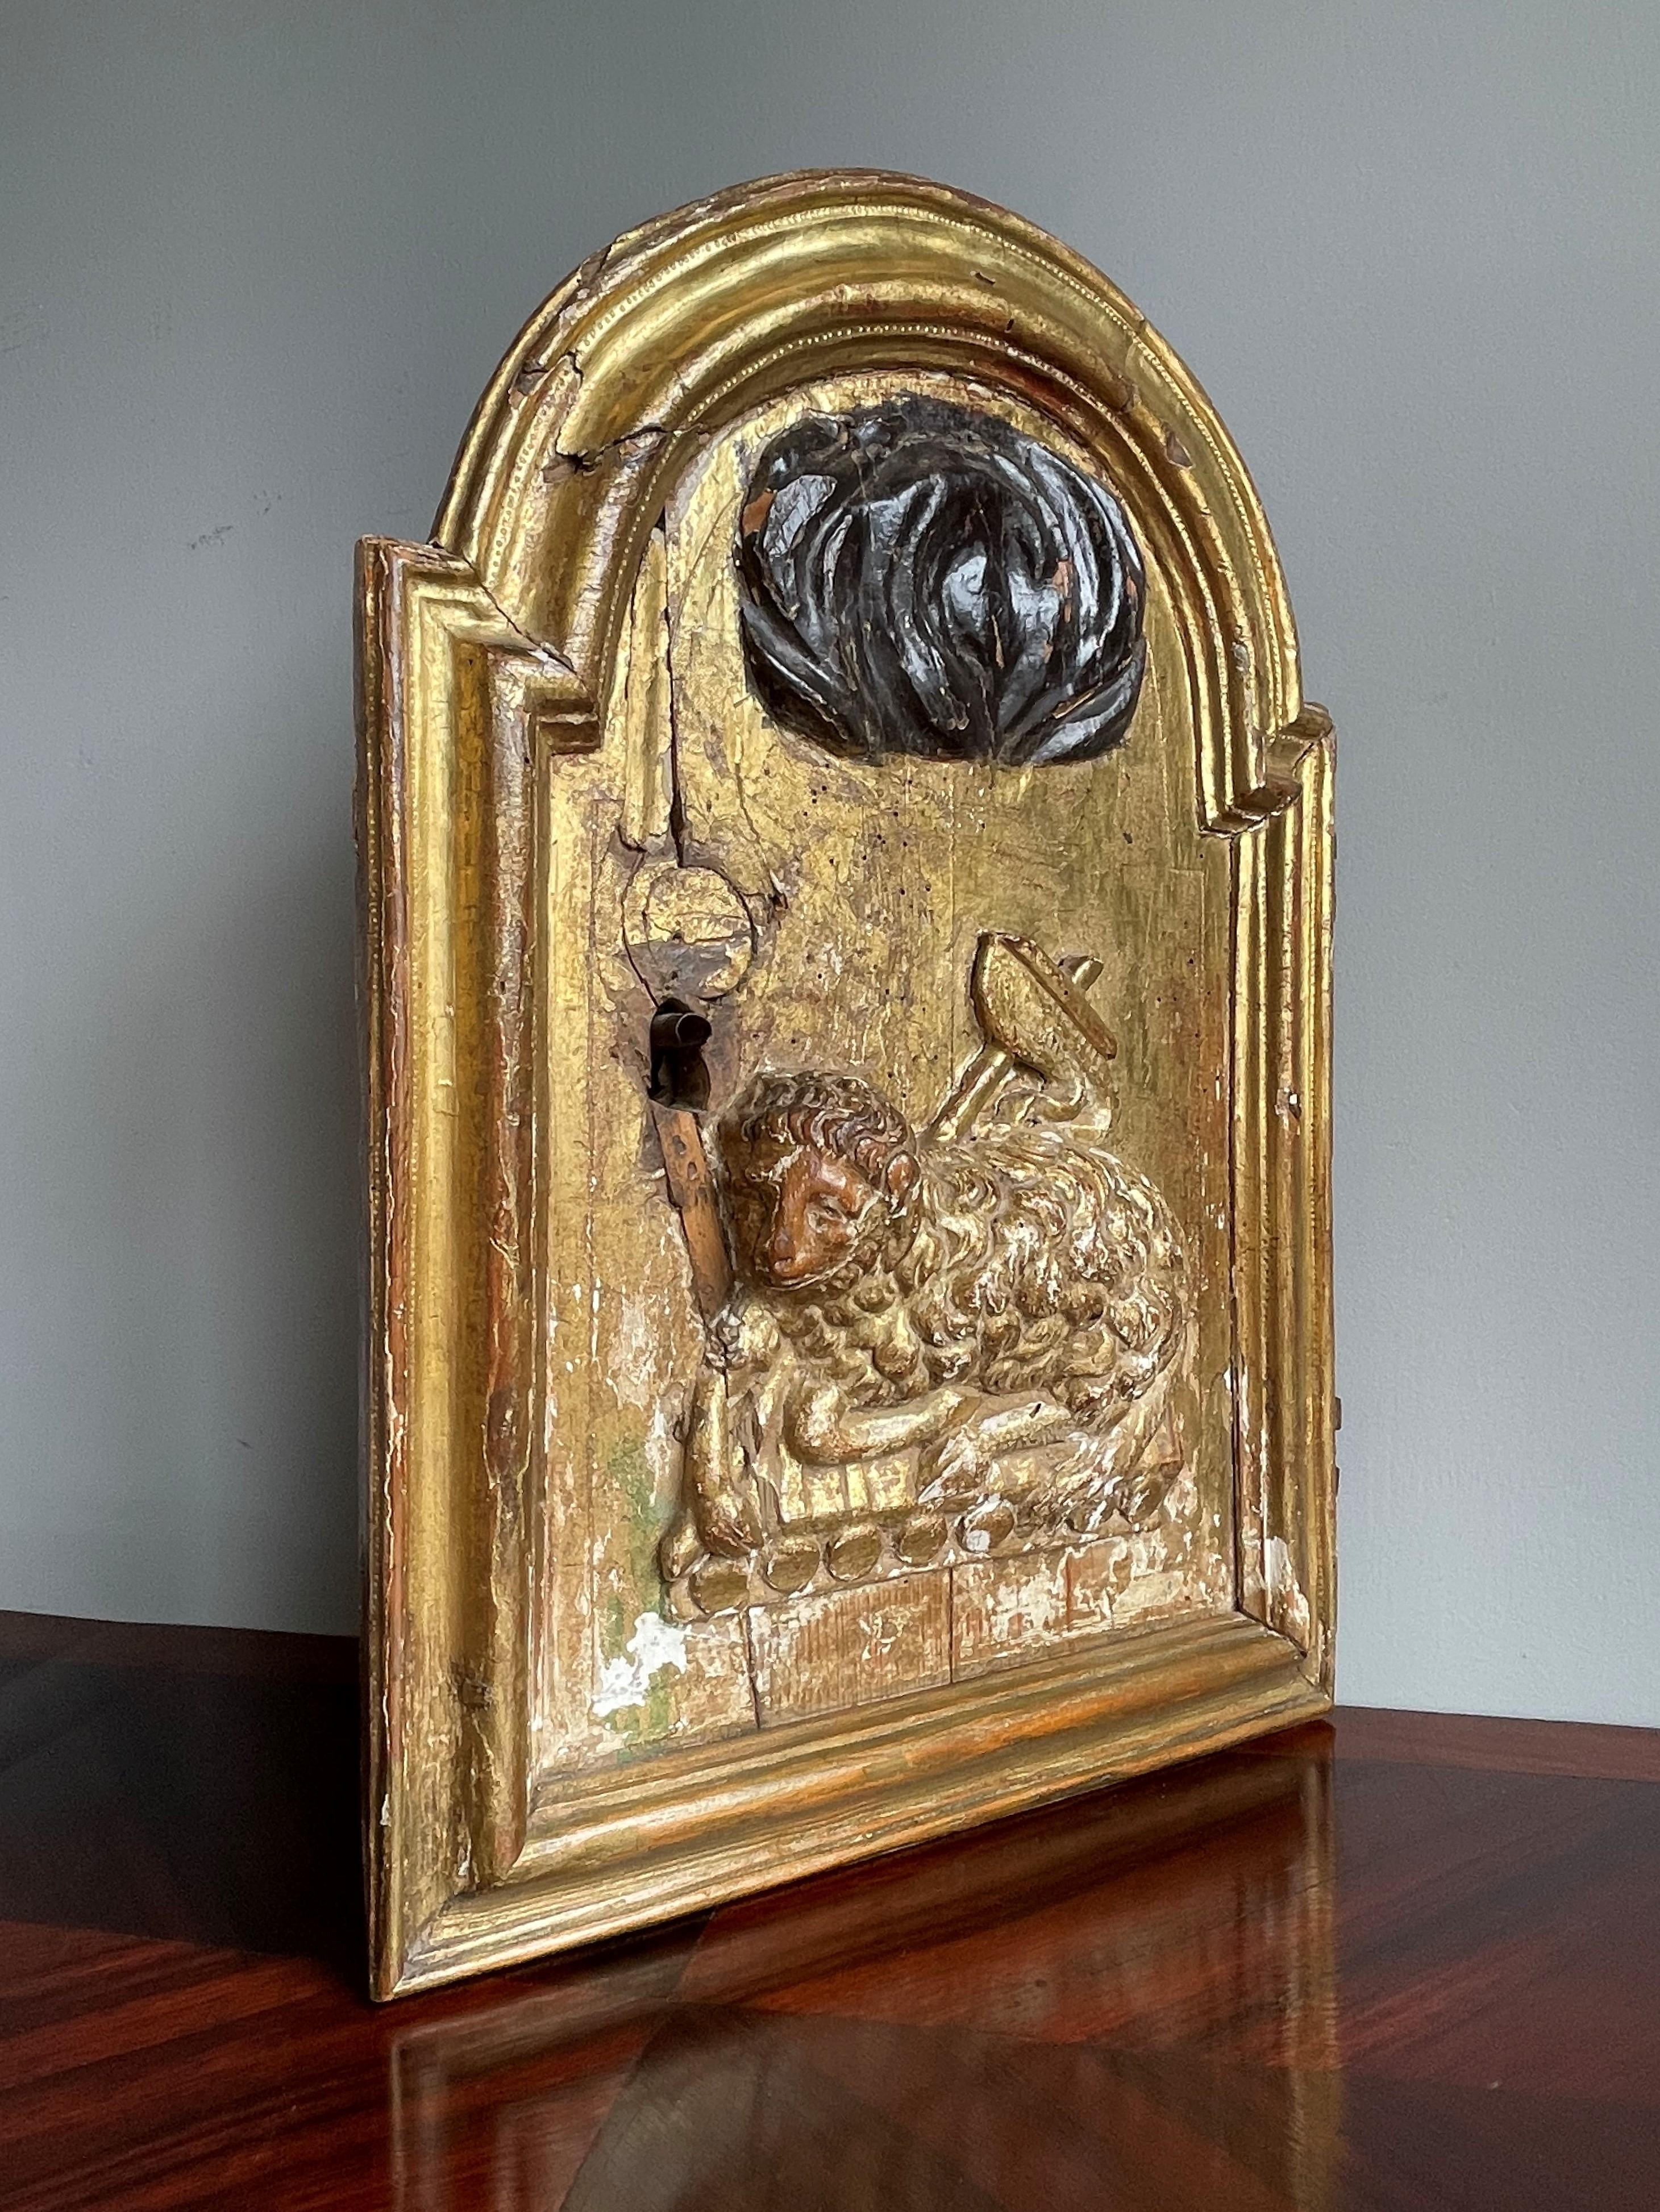 Incredibly old, rare and meaningful, antique giltwood tabernacle door with lamb of god sculpture.

This striking and all handcarved, symbolic tabernacle must have originally been part of a church or monastery tabernacle and it is a real work of